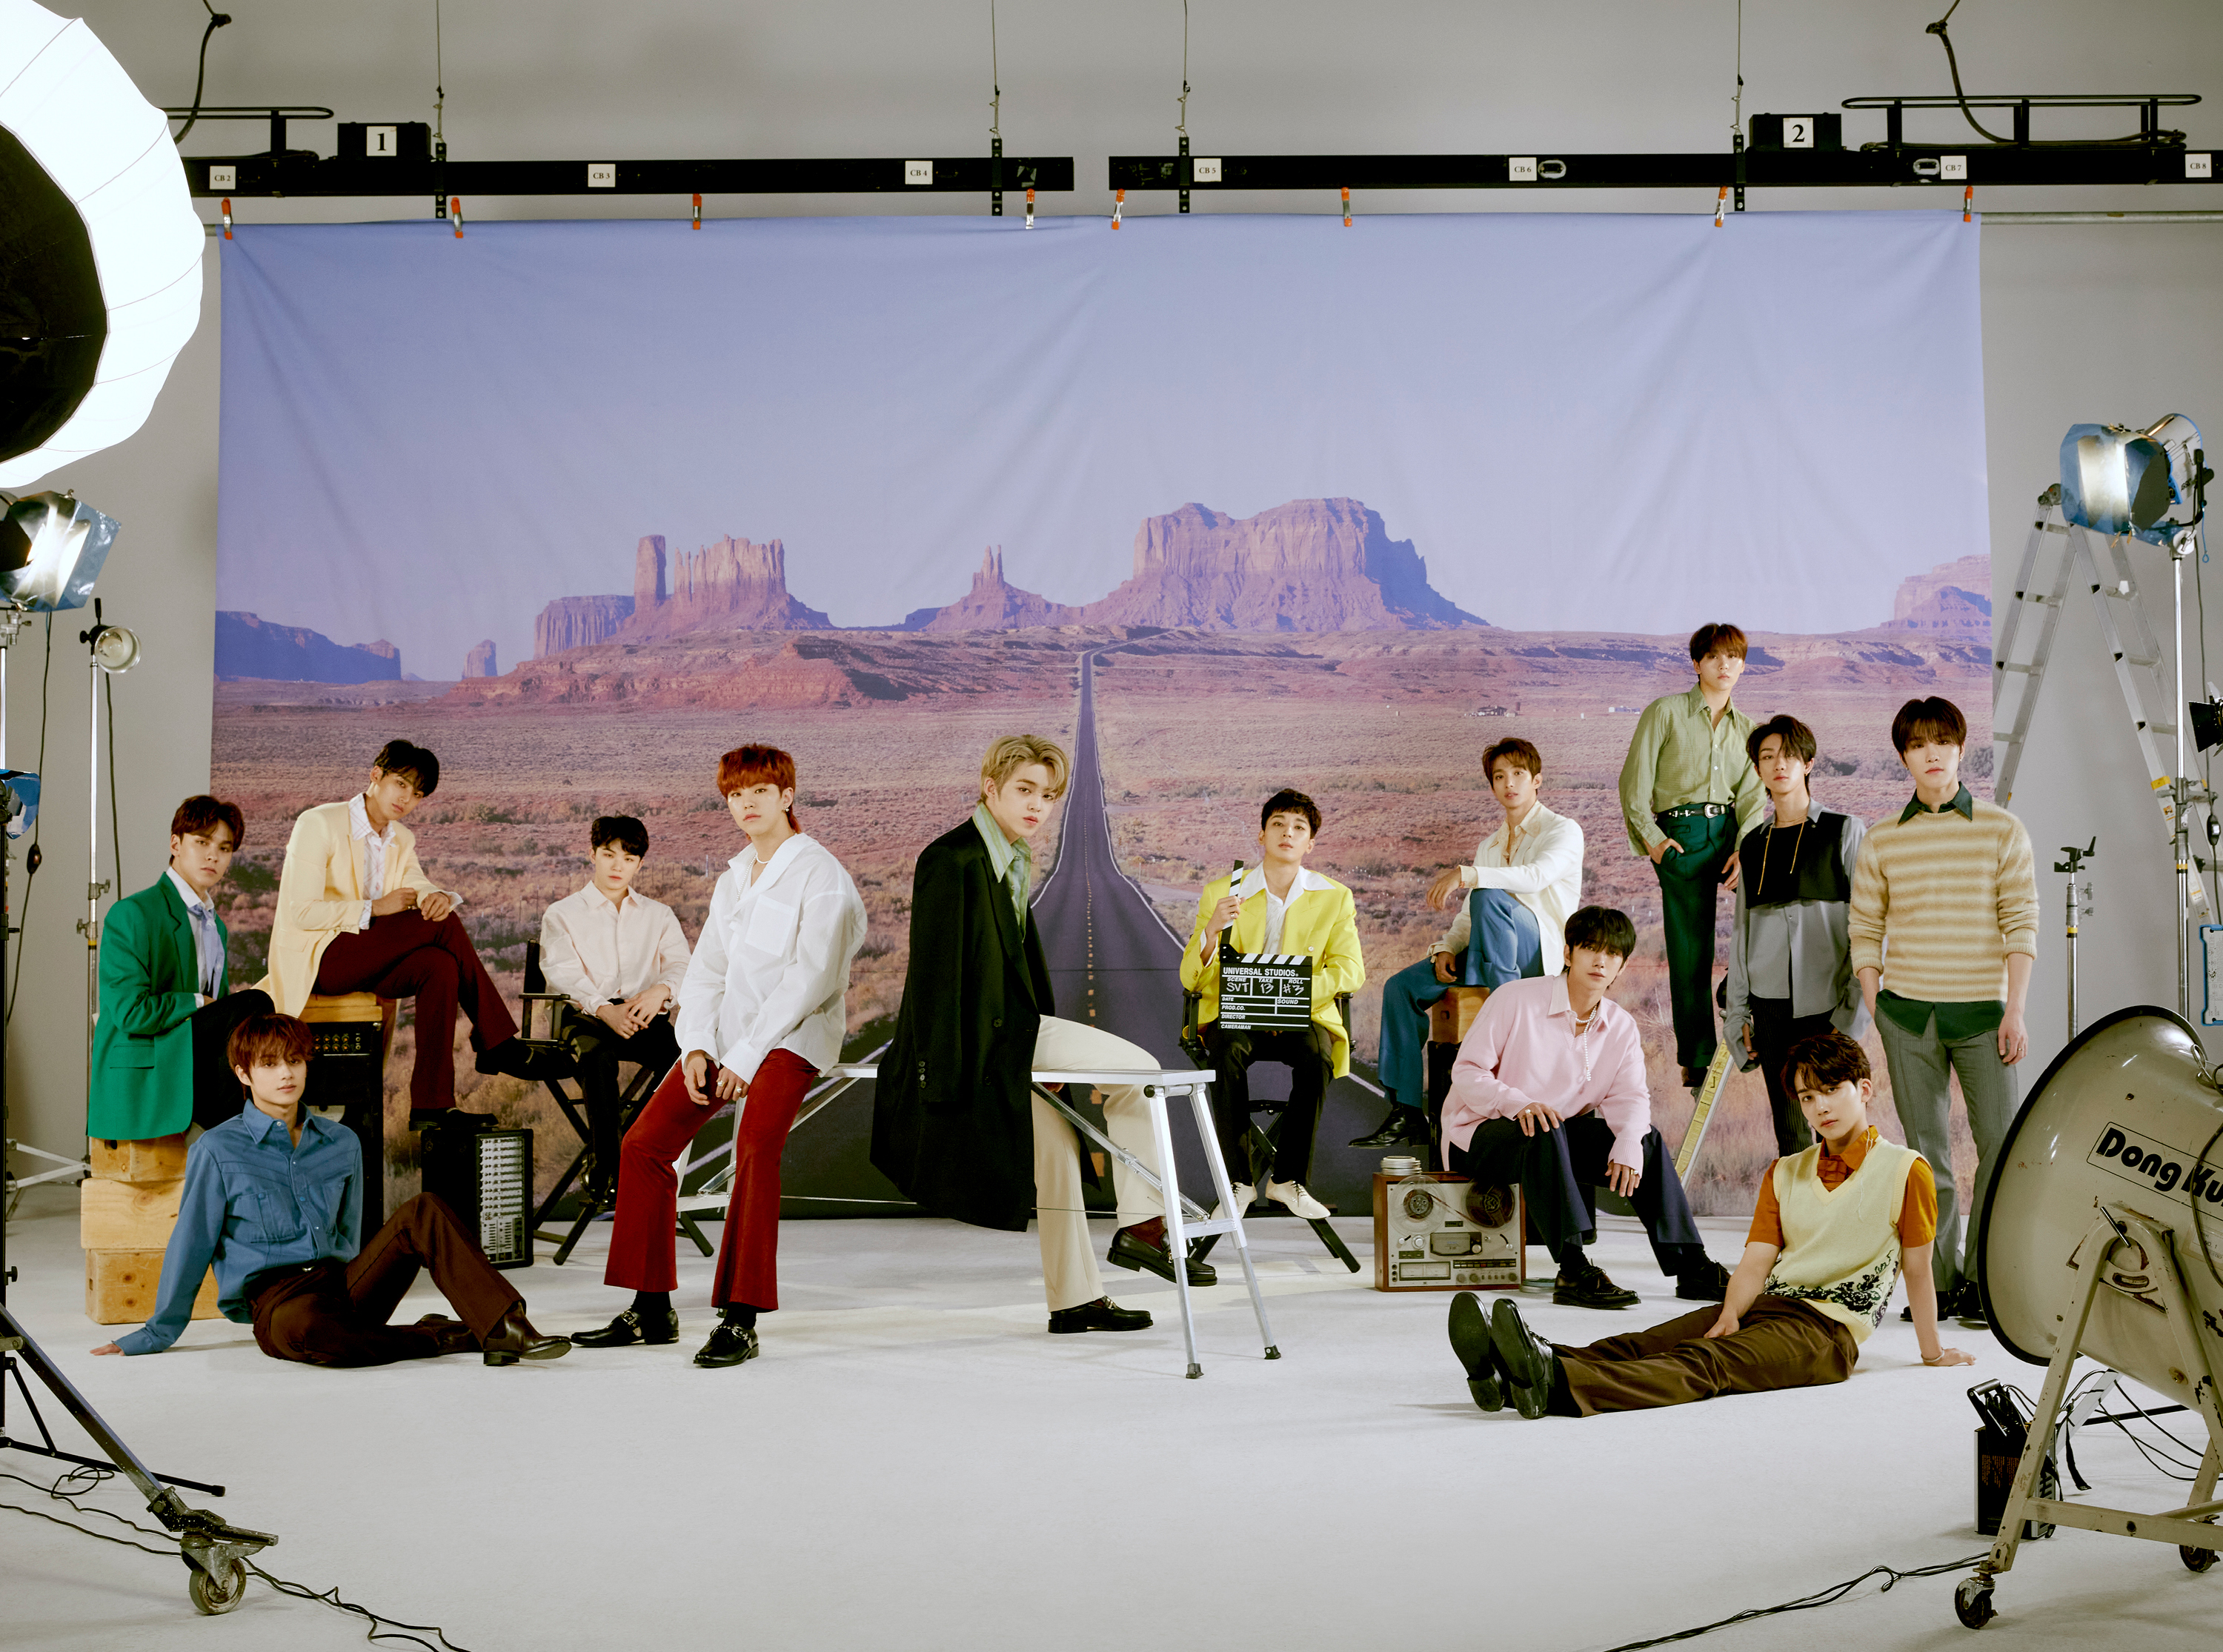 There’s No Pause in the Energy on SEVENTEEN’s New Album ‘Semicolon’